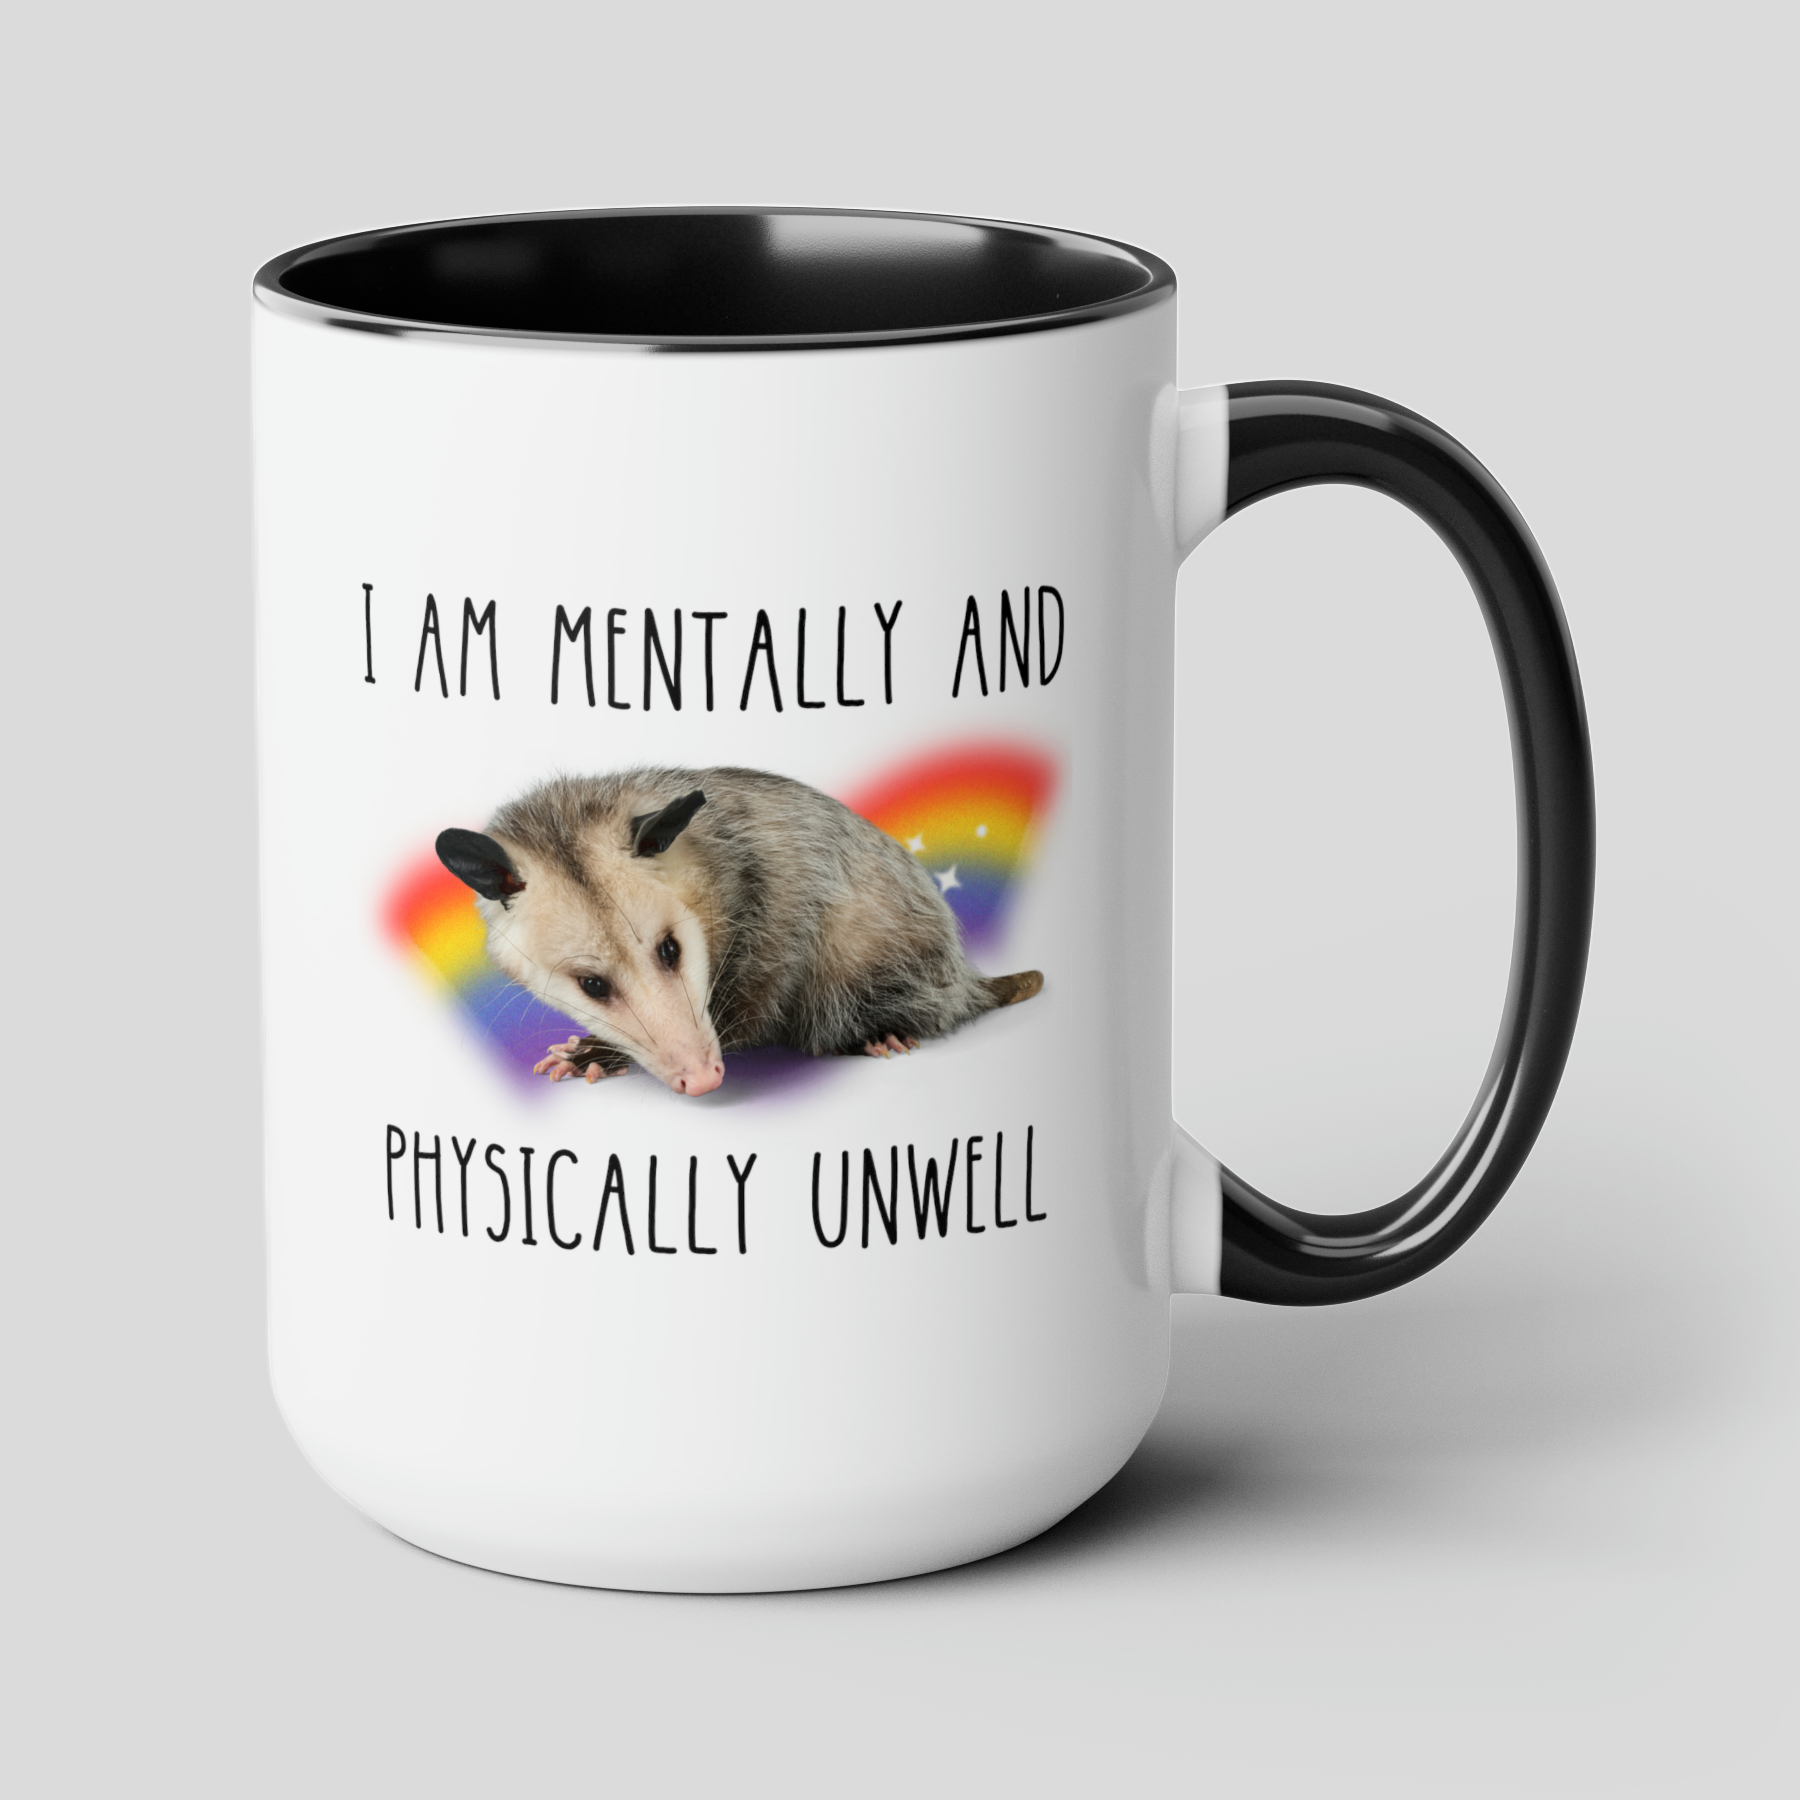 I Am Mentally And Physically Unwell 15oz white with black accent funny large coffee mug gift for mental health meme retro rainbow sparkles possum lover opossum waveywares wavey wares wavywares wavy wares cover